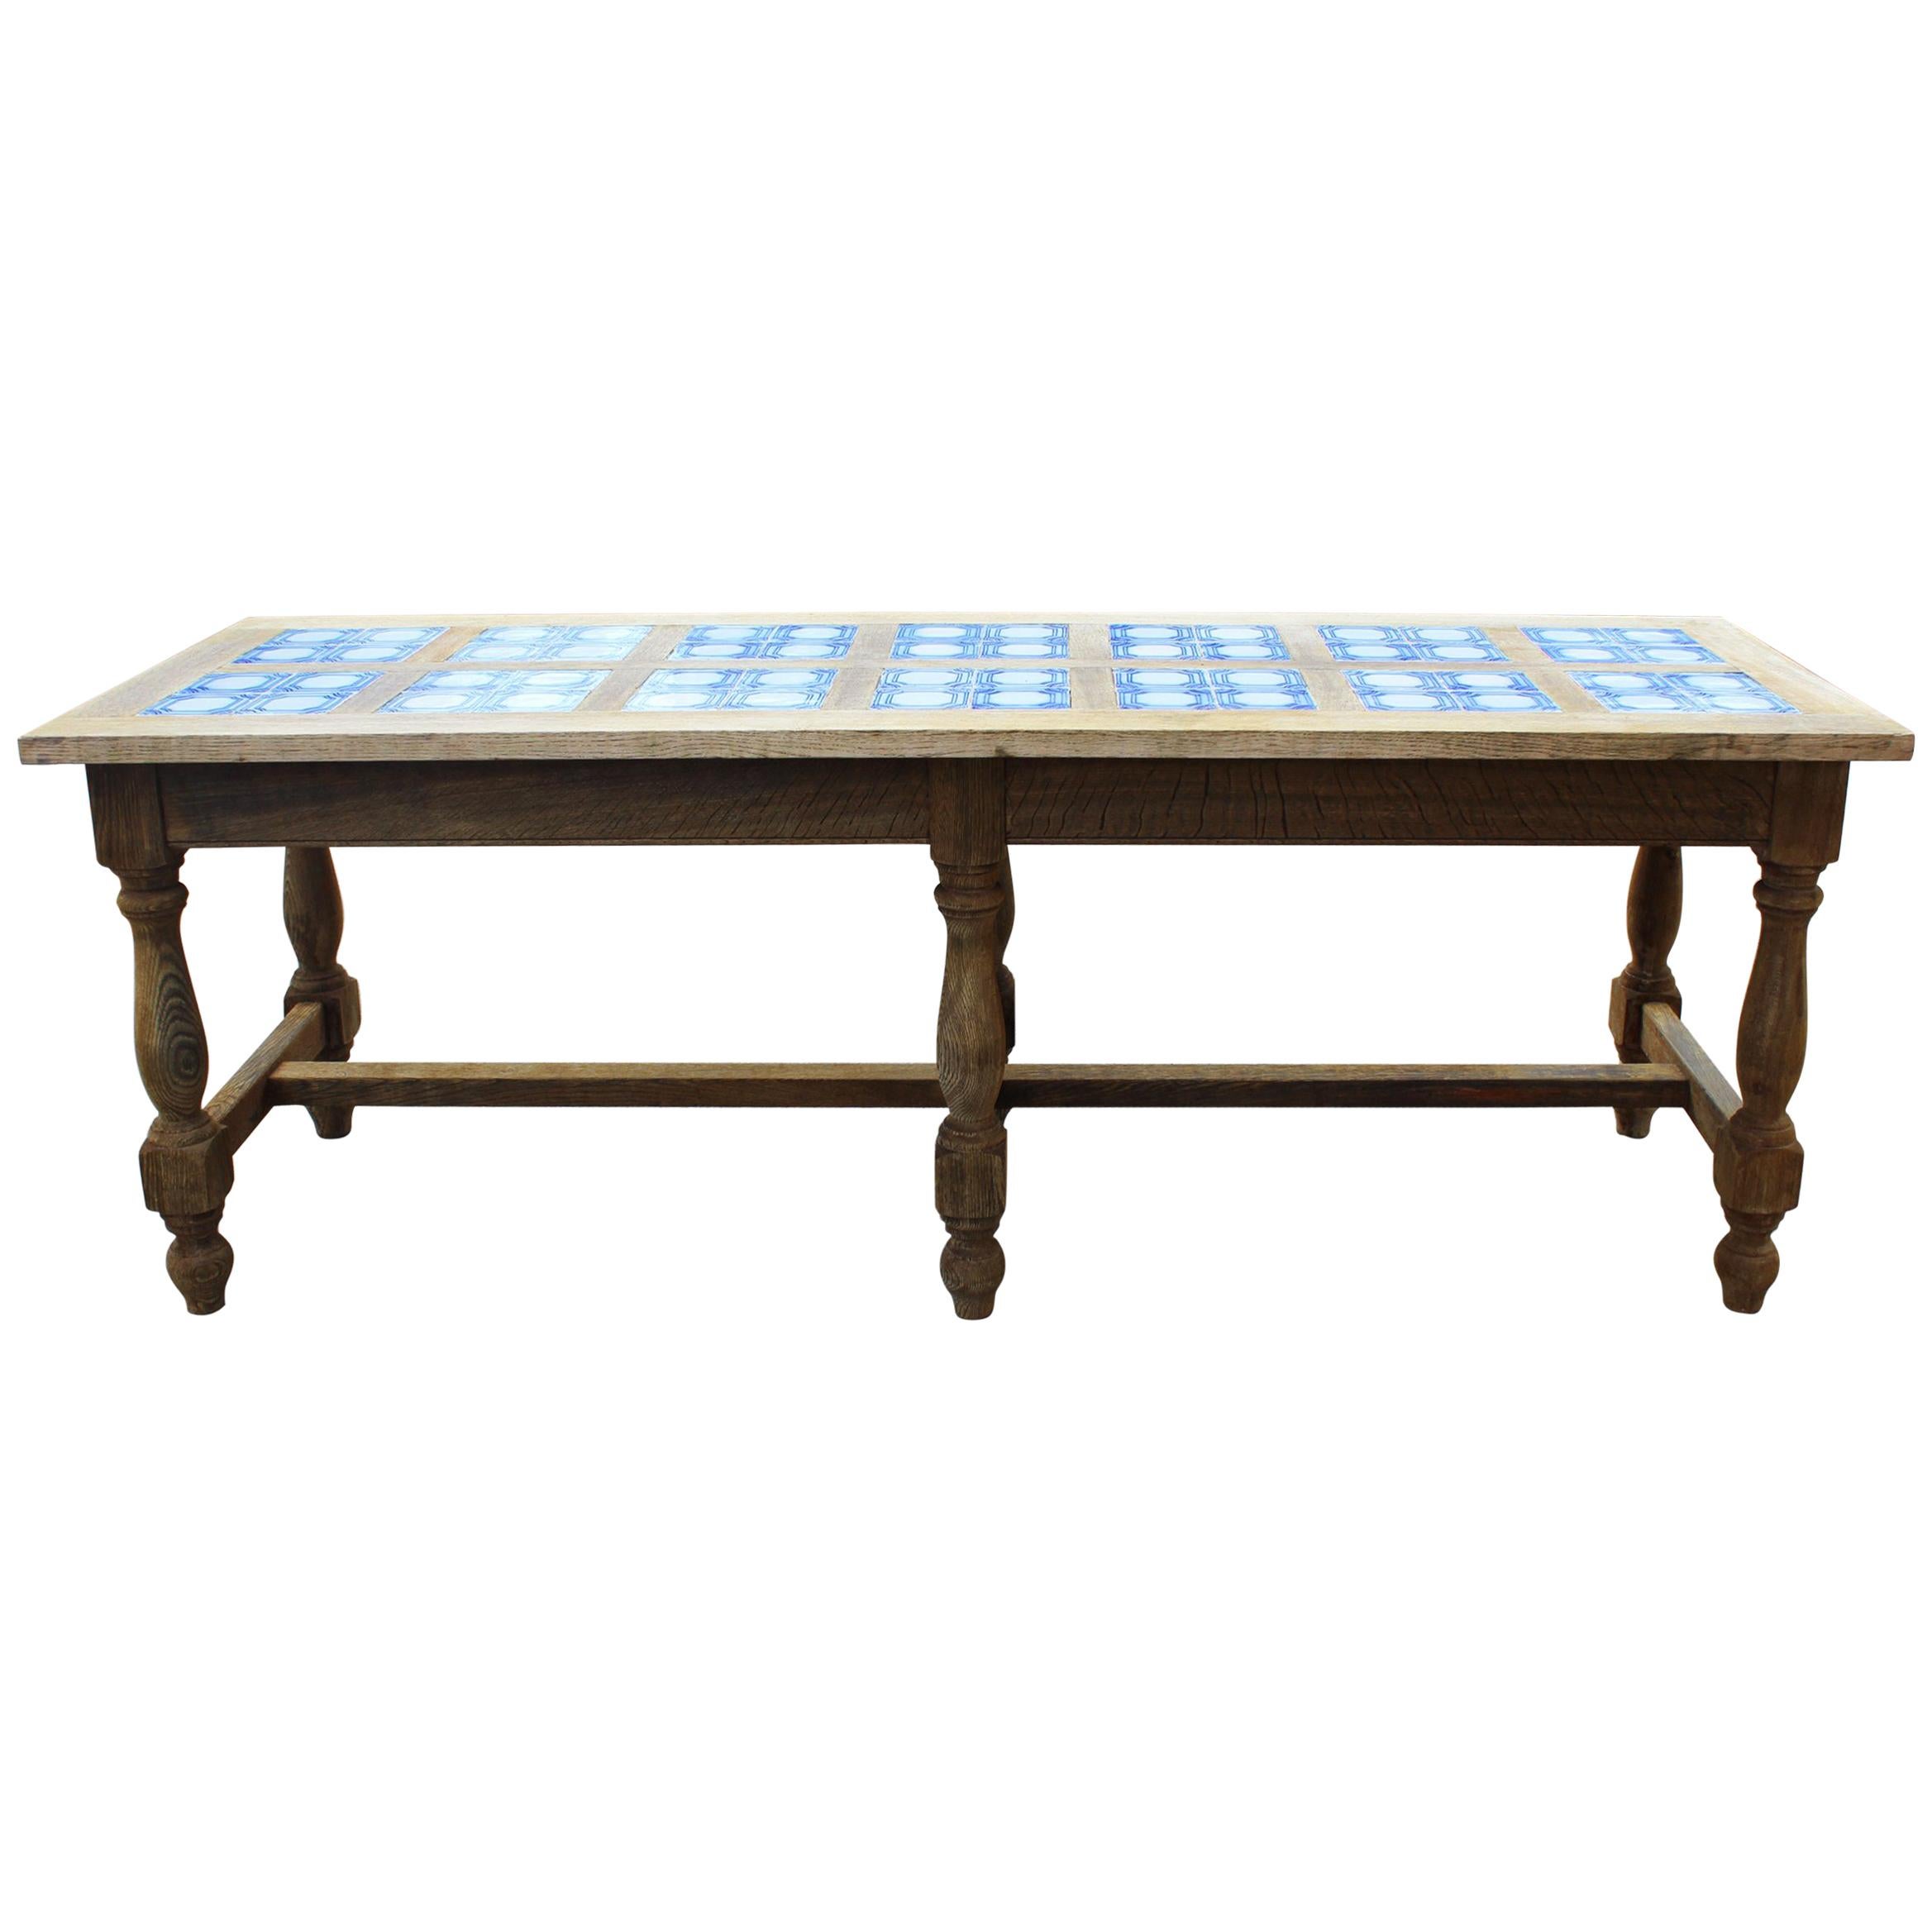 1980s Spanish Kitchen Table with Glazed Ceramic Tiled Top